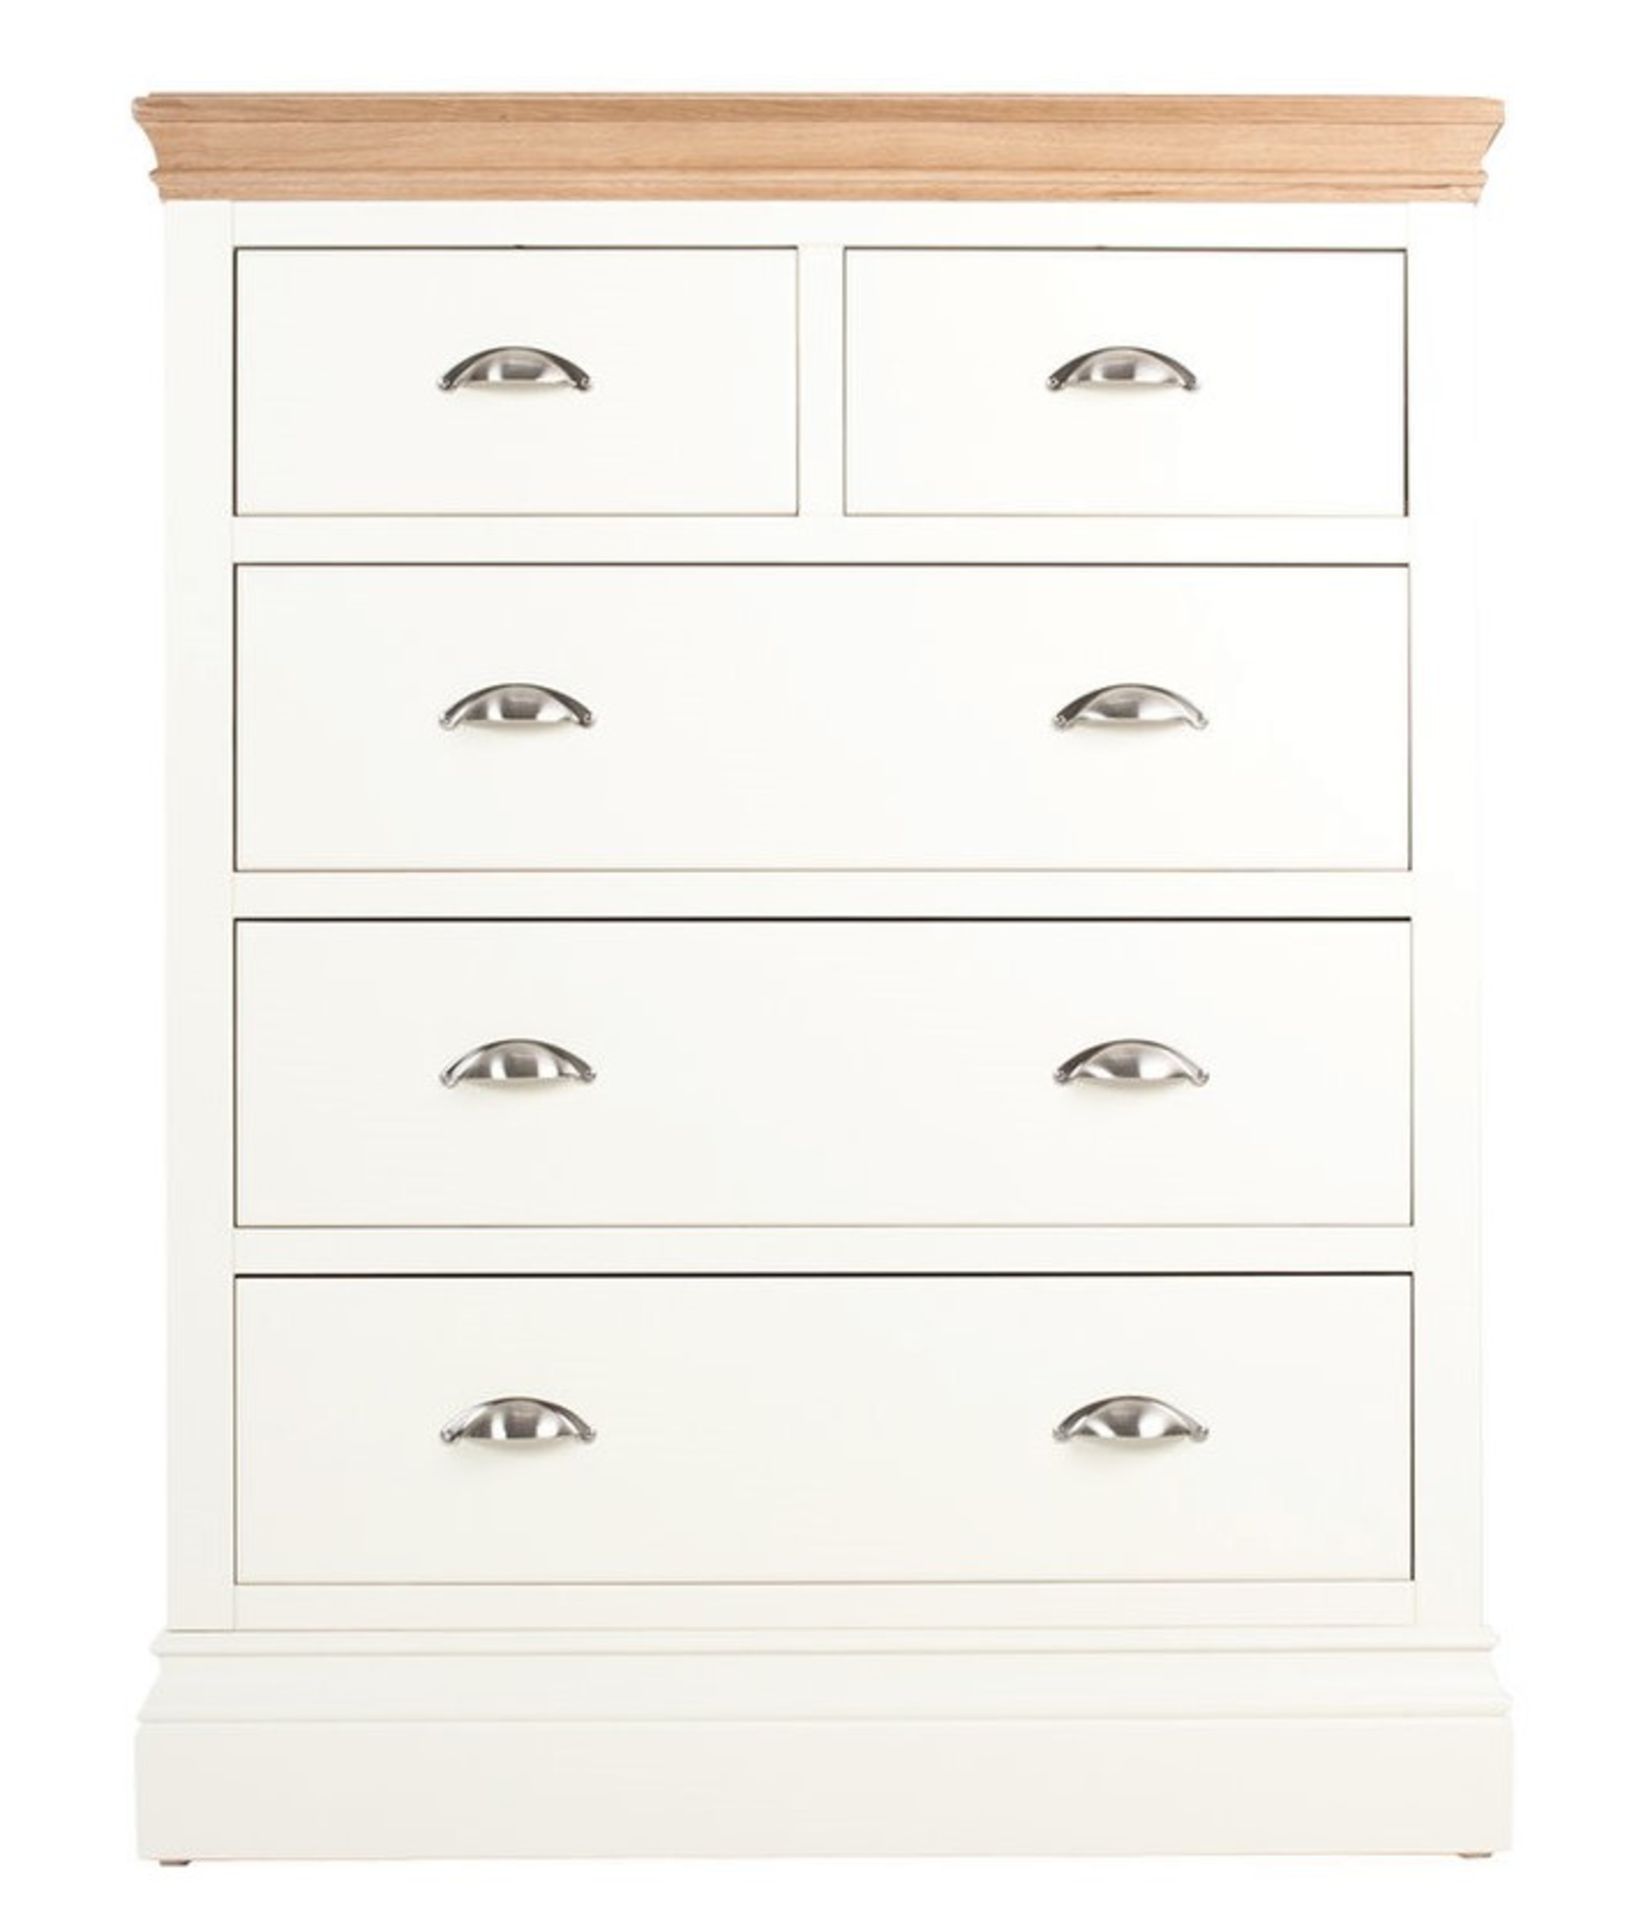 1 x Clement 3+2 Chest of Bedroom Drawers By Brewers Home - Solid Wood Painted Furniture Finished - Image 5 of 6